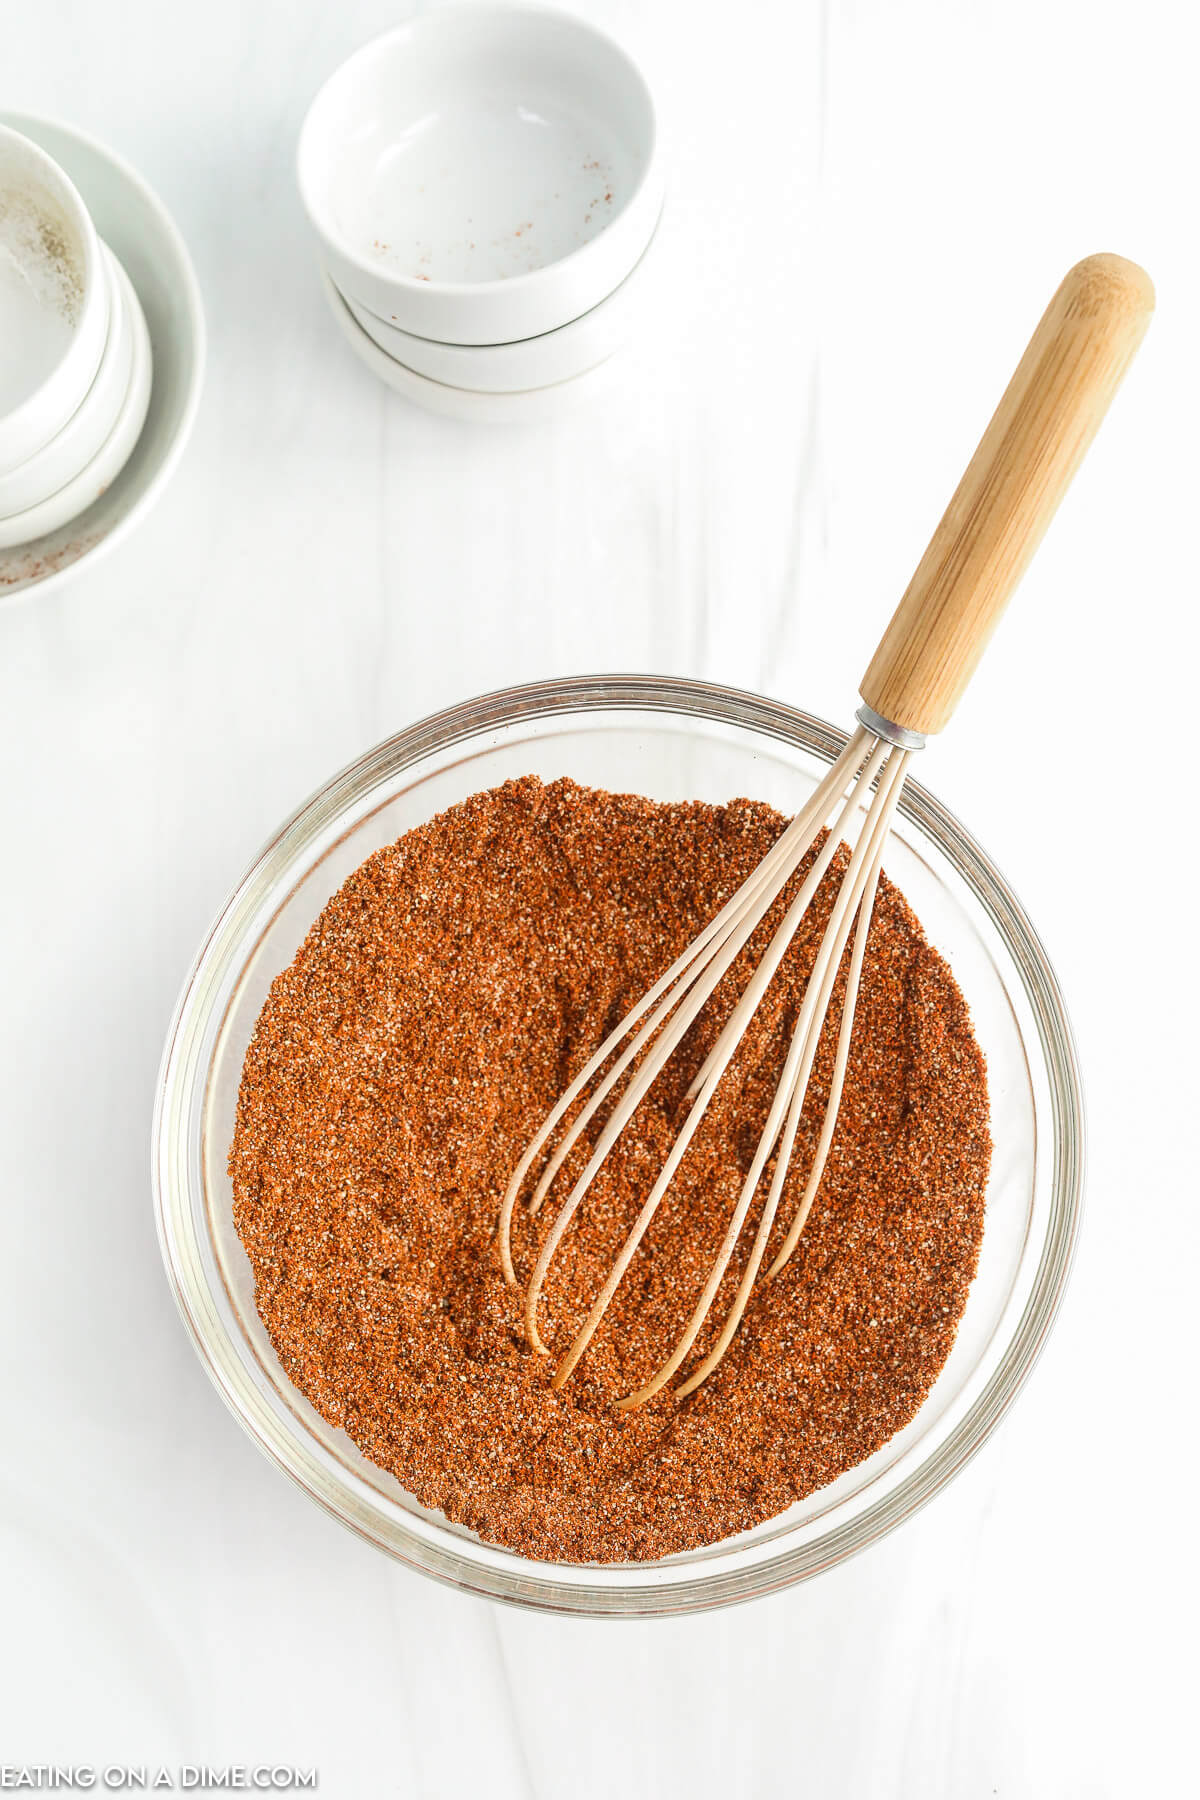 Combined chili seasoning in a bowl with a whisk